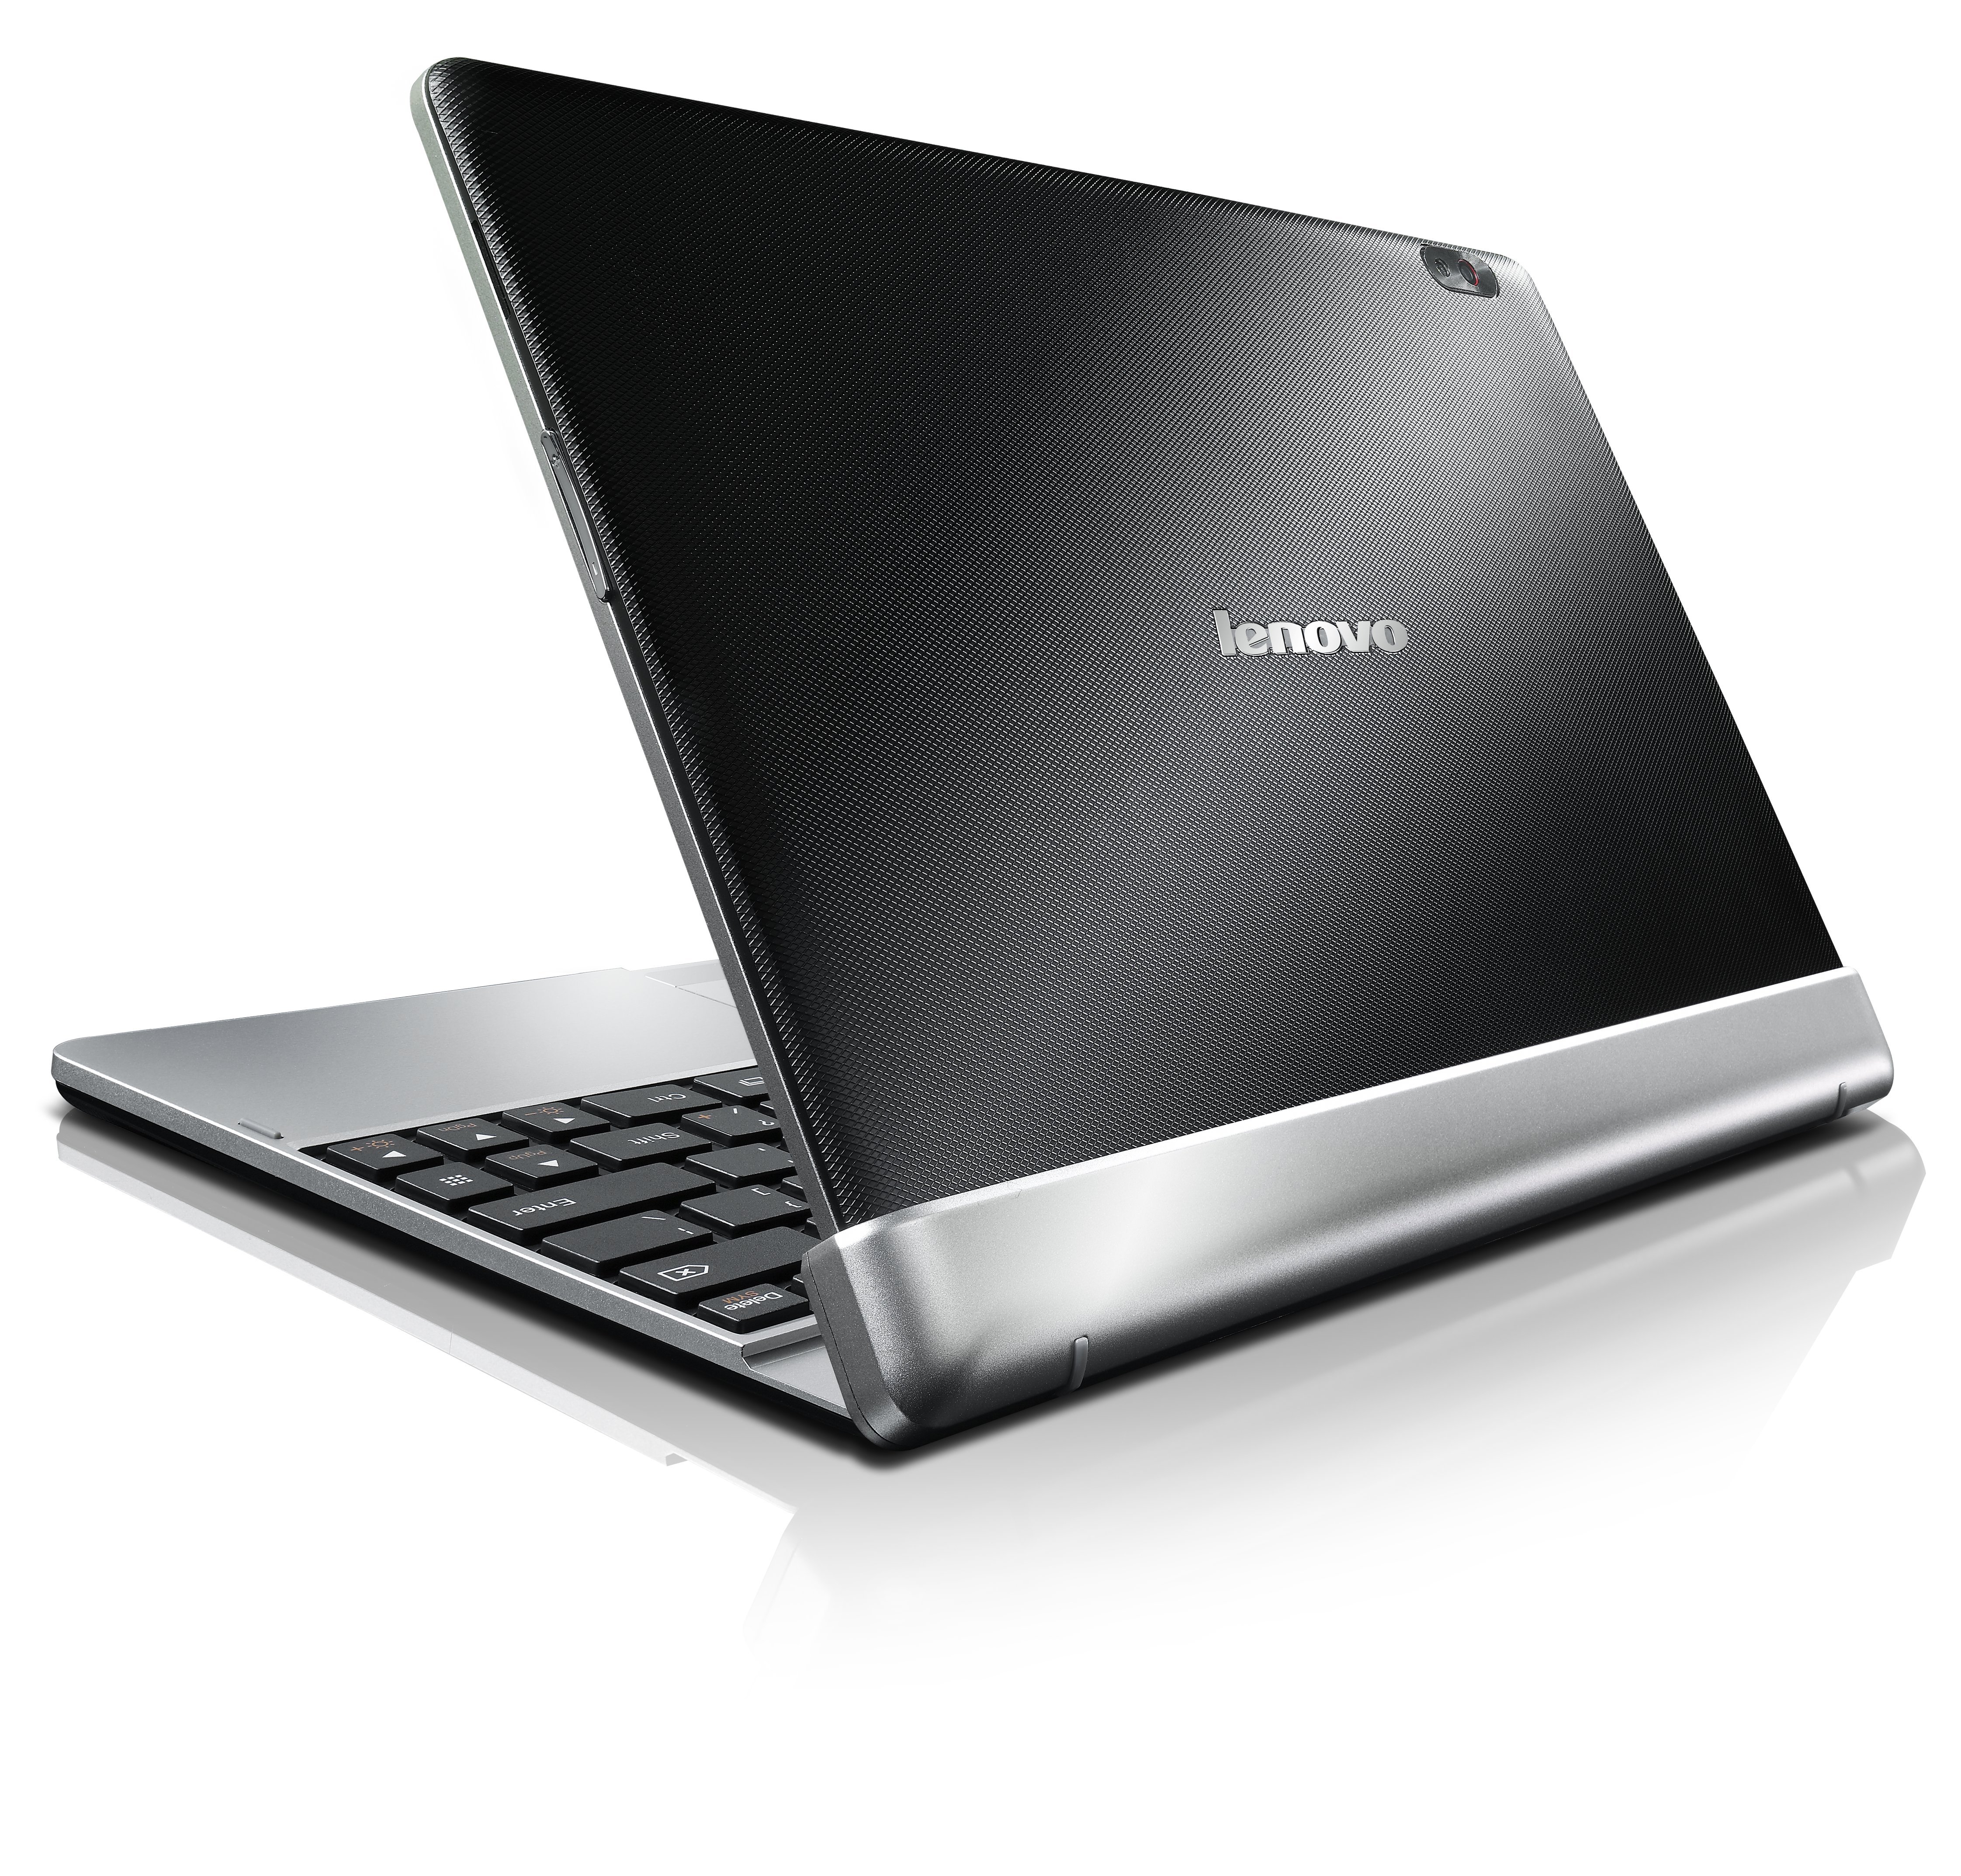 Lenovo IdeaTab A2107, A2109 and S2110 Tablets Land at IFA 2012